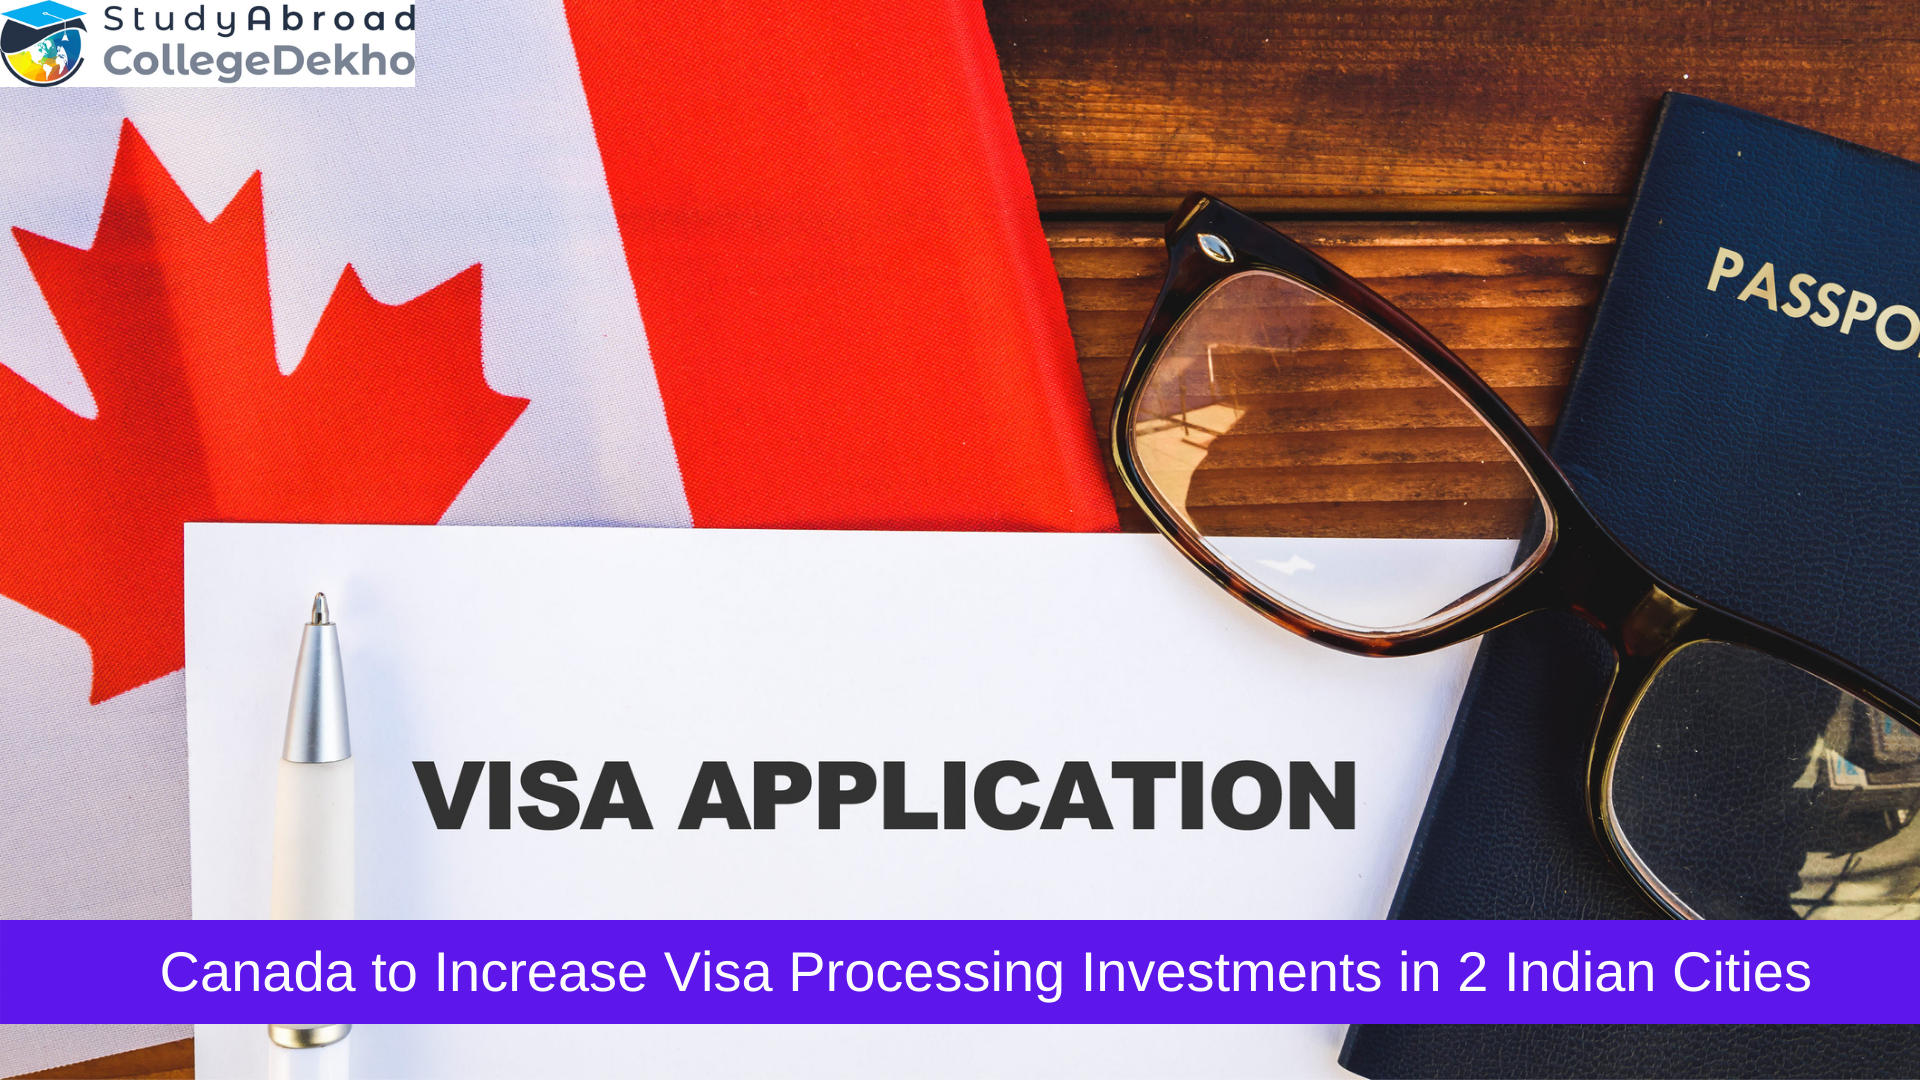 Canada Set to Increase Investment in Visa Processing in Chandigarh and Delhi